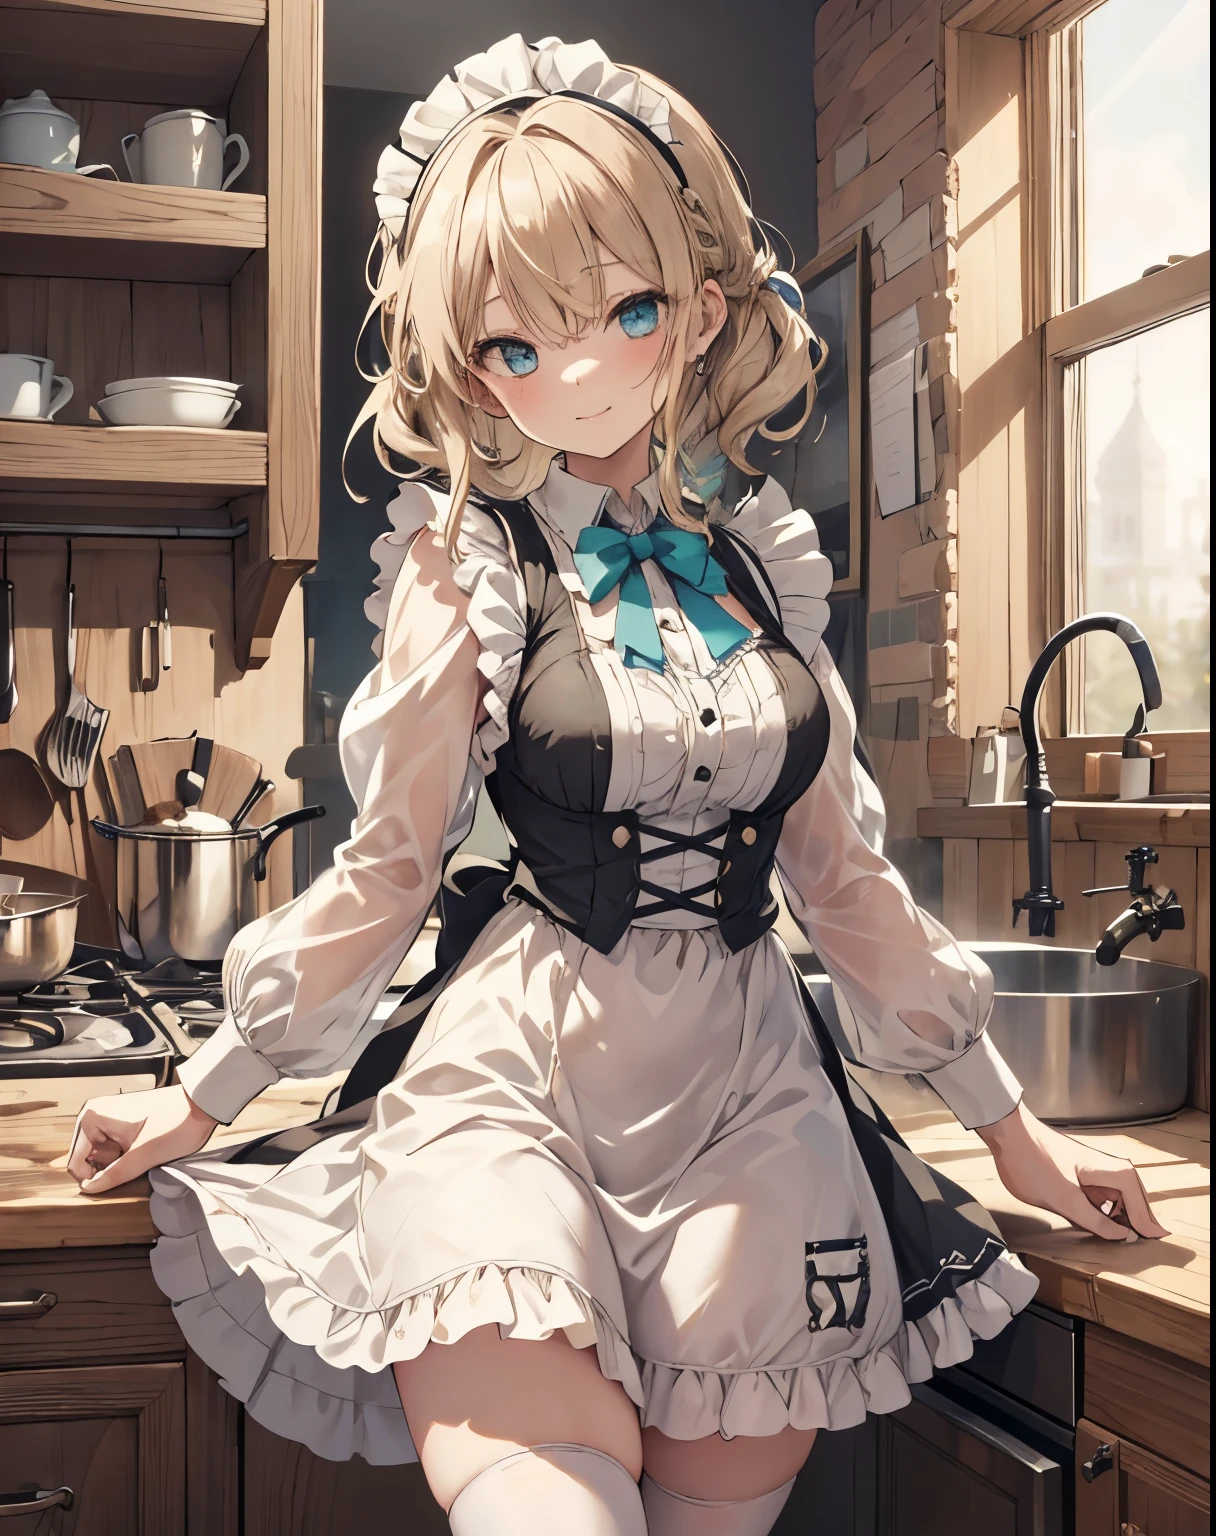 masterpiece, 1girl, sparrow, a blonde haired girl, wearing a maid clothes, curly medium hair, messy hair, slim body, he close her left eye, shirt ornament, aqua eyes, sho show her back, ahoge, black vest, baby face, big breast, beautiful breasts, rounded breasts, braid hair, long sleeves, beautiful eyes, white stocking, droopy eyes, her age is 19 years old, kitchen, victorian dress, maid headband, smile, toki_bluearchive